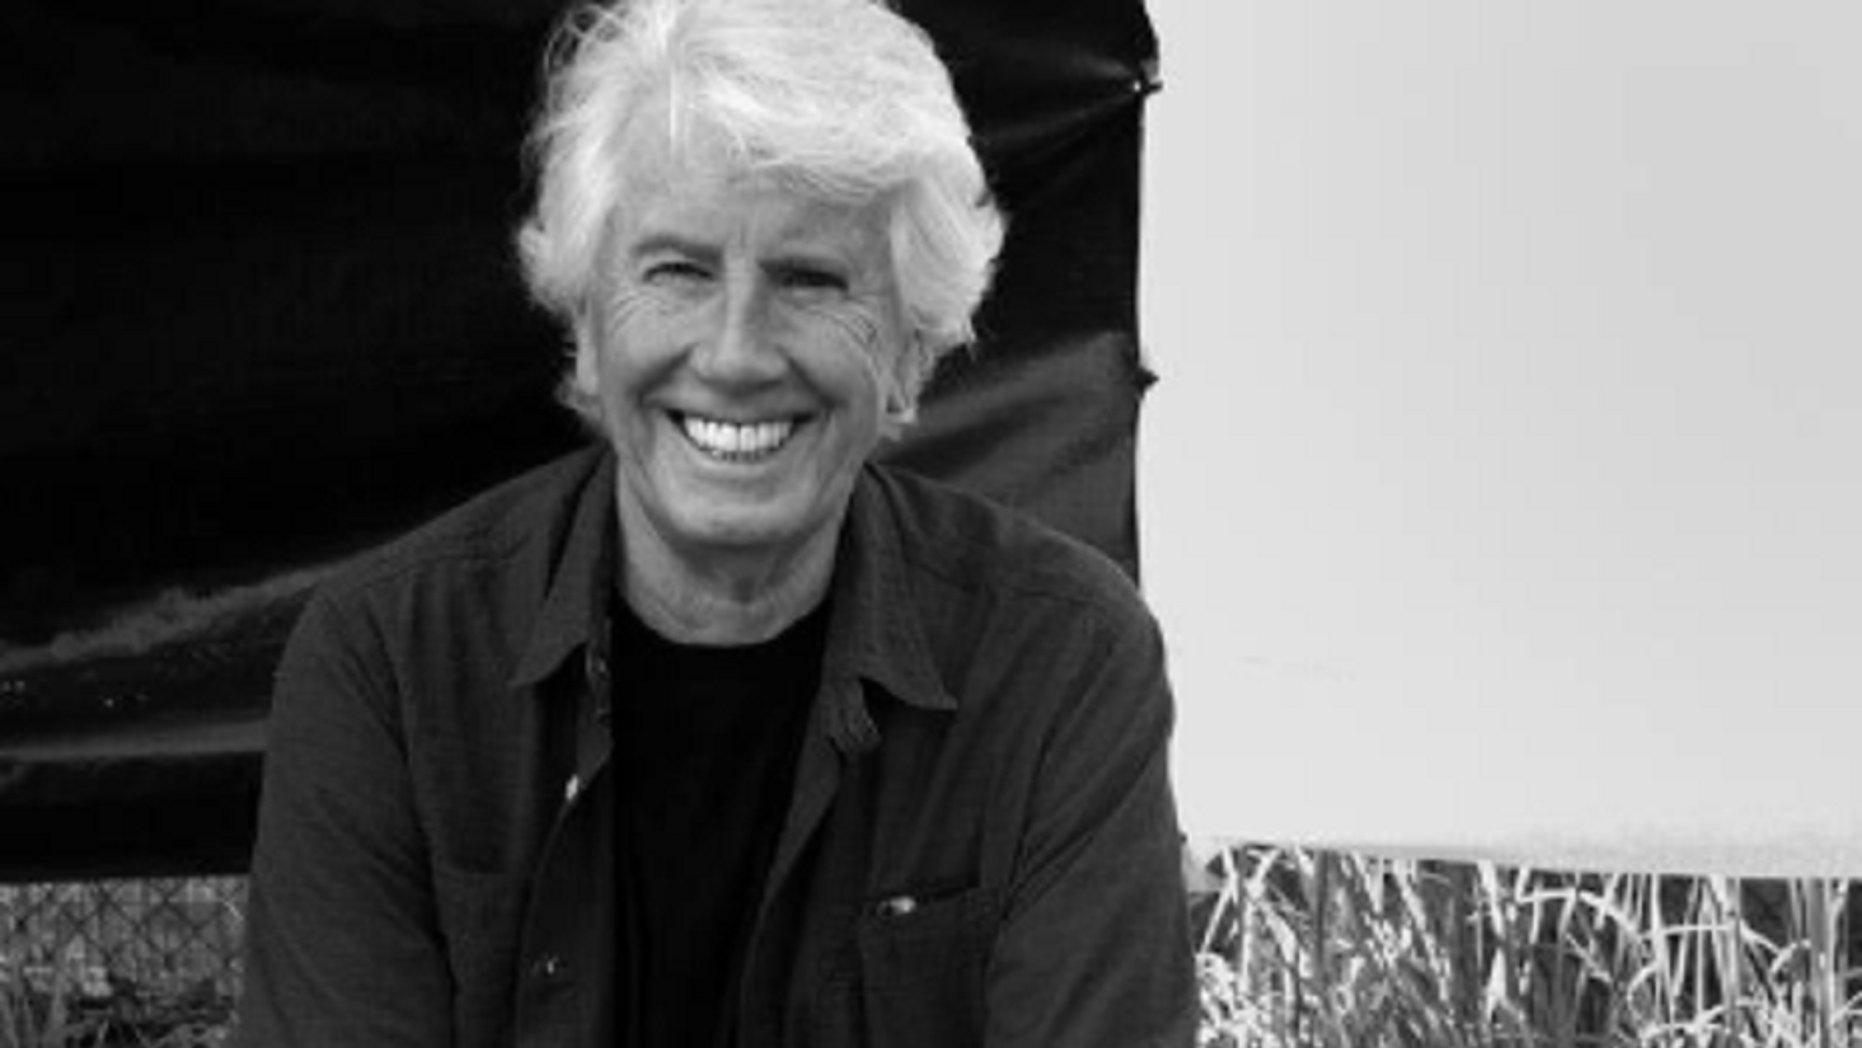 Graham Nash said the CSN would not play together anymore.